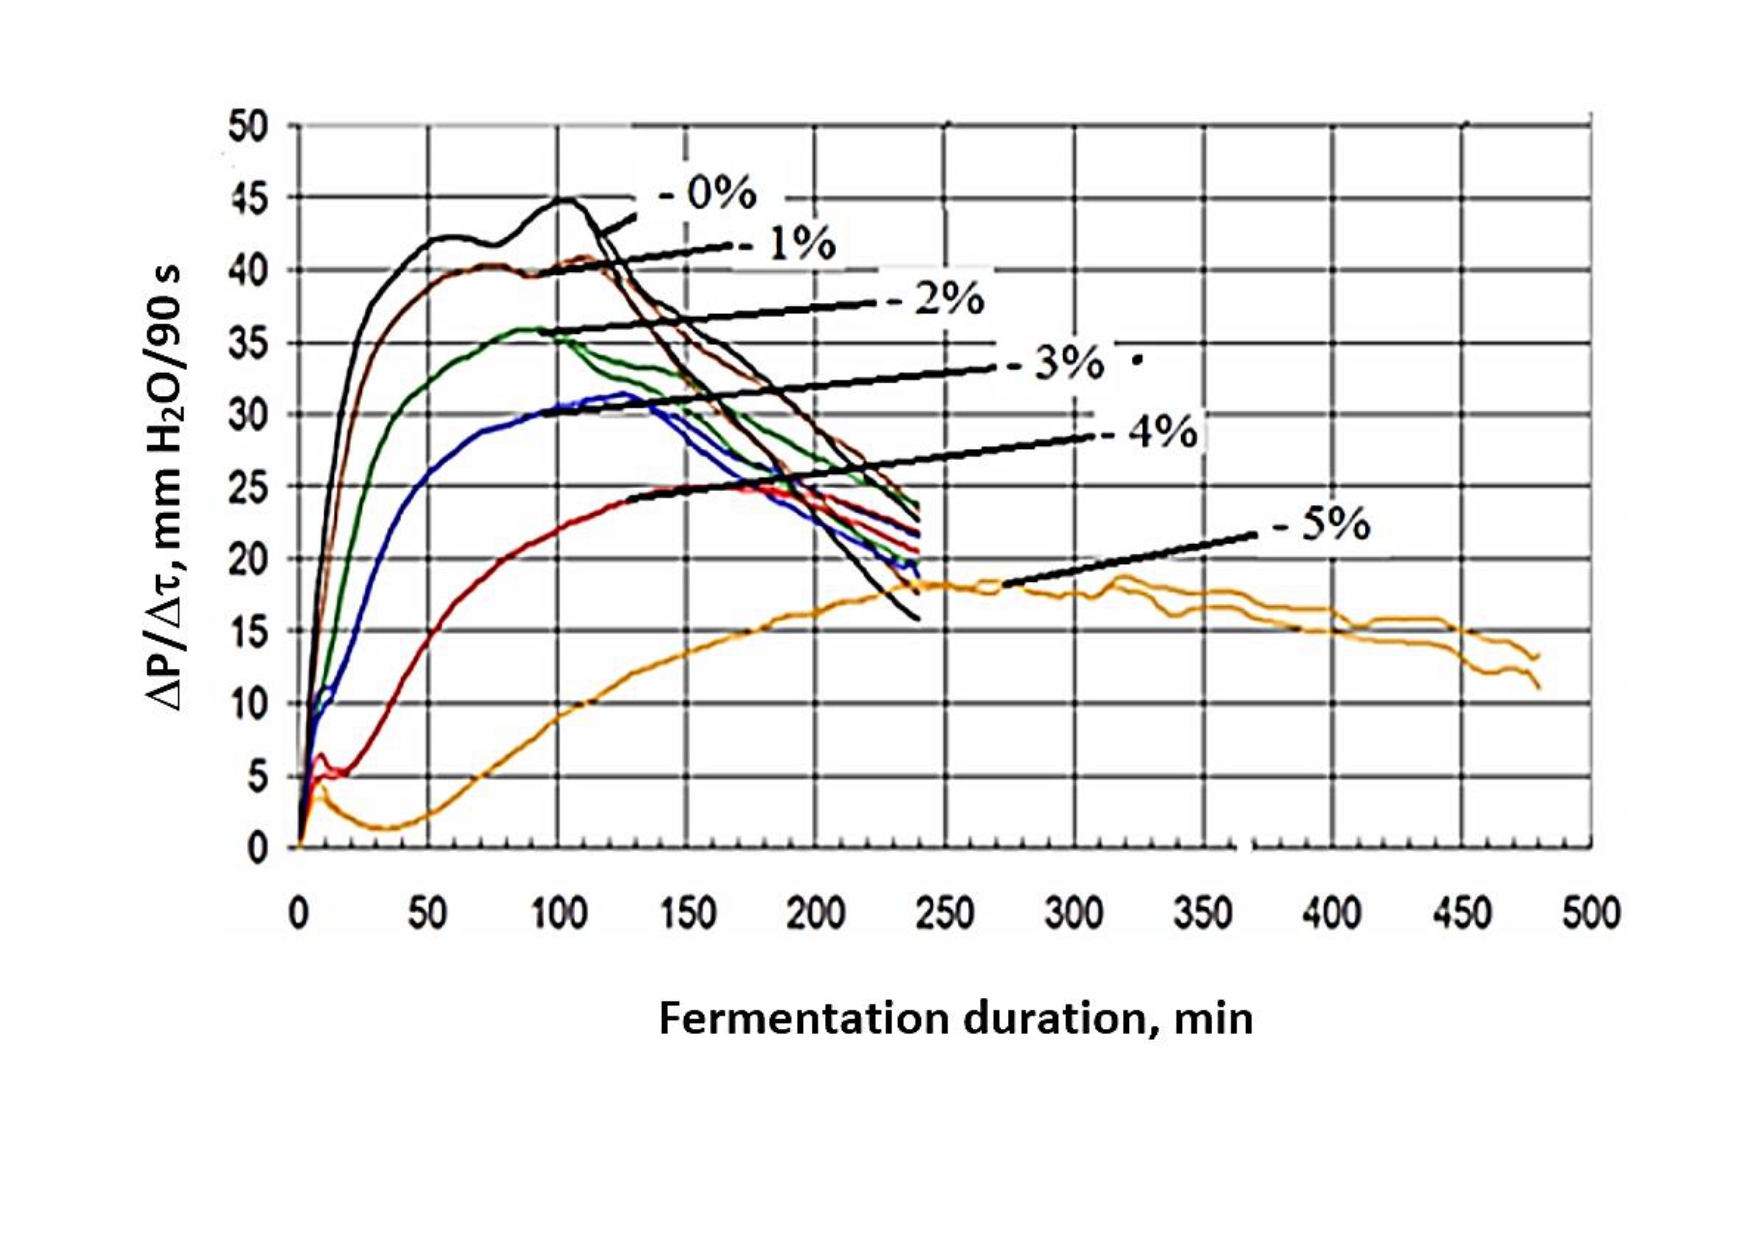 The effect of the duration of fermentation of wheat dough on the rate of change in the pressure of carbon dioxide formed at different dosages of table salt